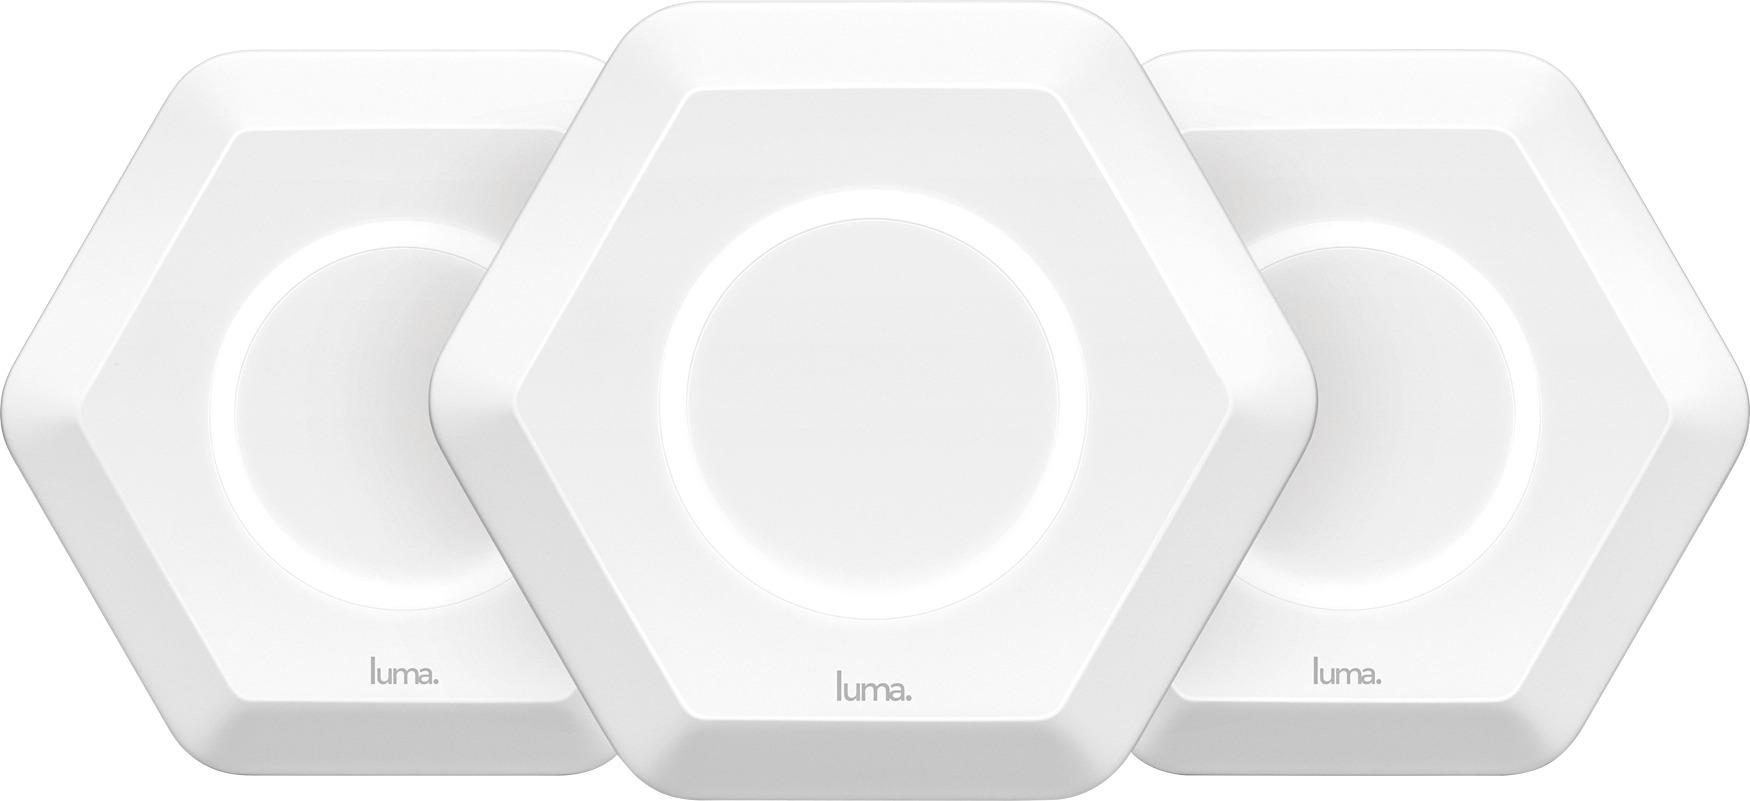 1 Pack - White Luma Whole Home WiFi Free Parental Controls Compatible with Alexa -   Replaces WiFi Extenders and Routers Free Virus Blocking Gigabit Speed 